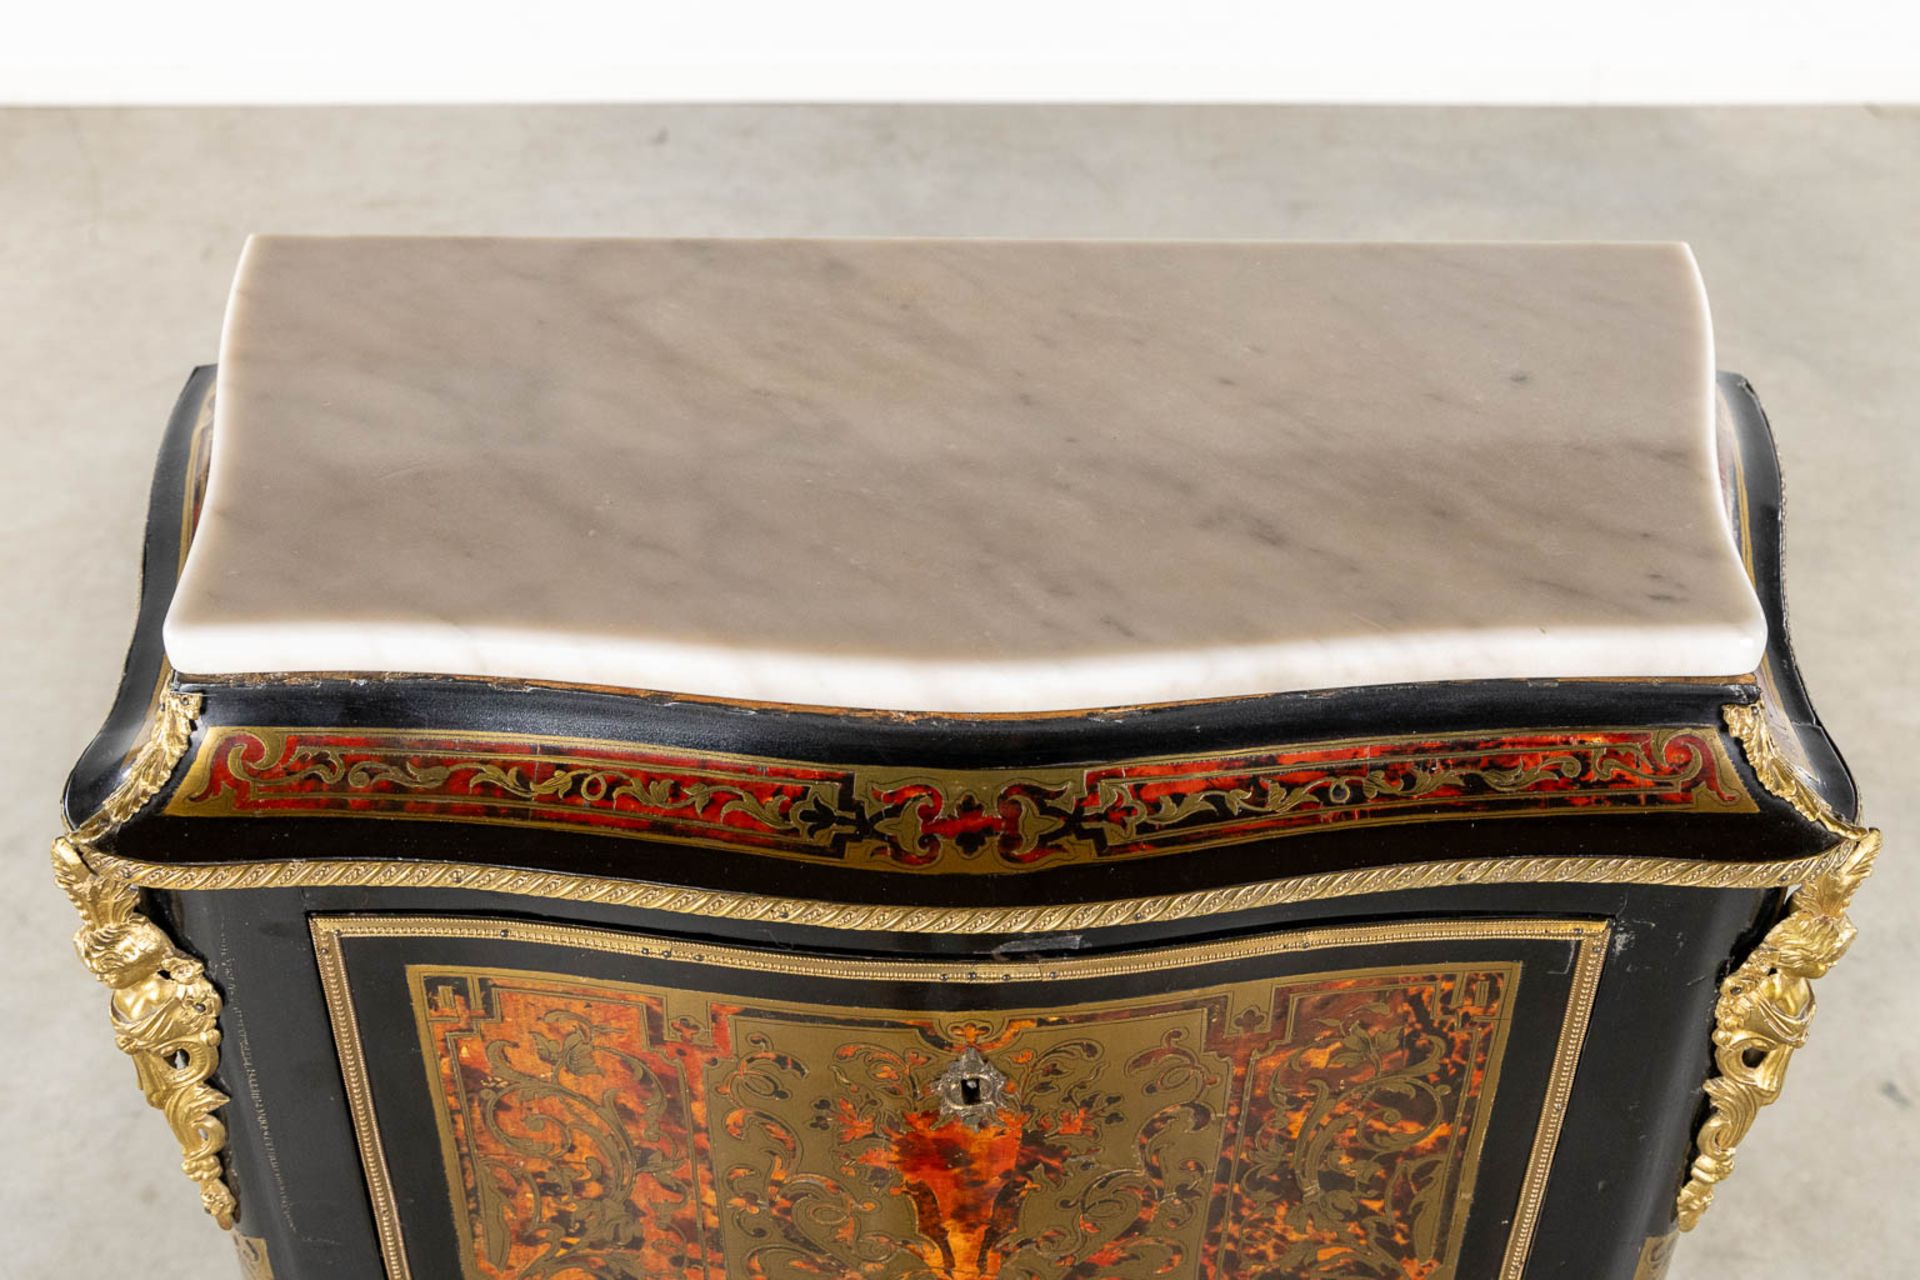 A Boulle inlay secretaire cabinet, Napoleon 3 period, 19th C. (L:36 x W:75 x H:122 cm) - Image 18 of 18